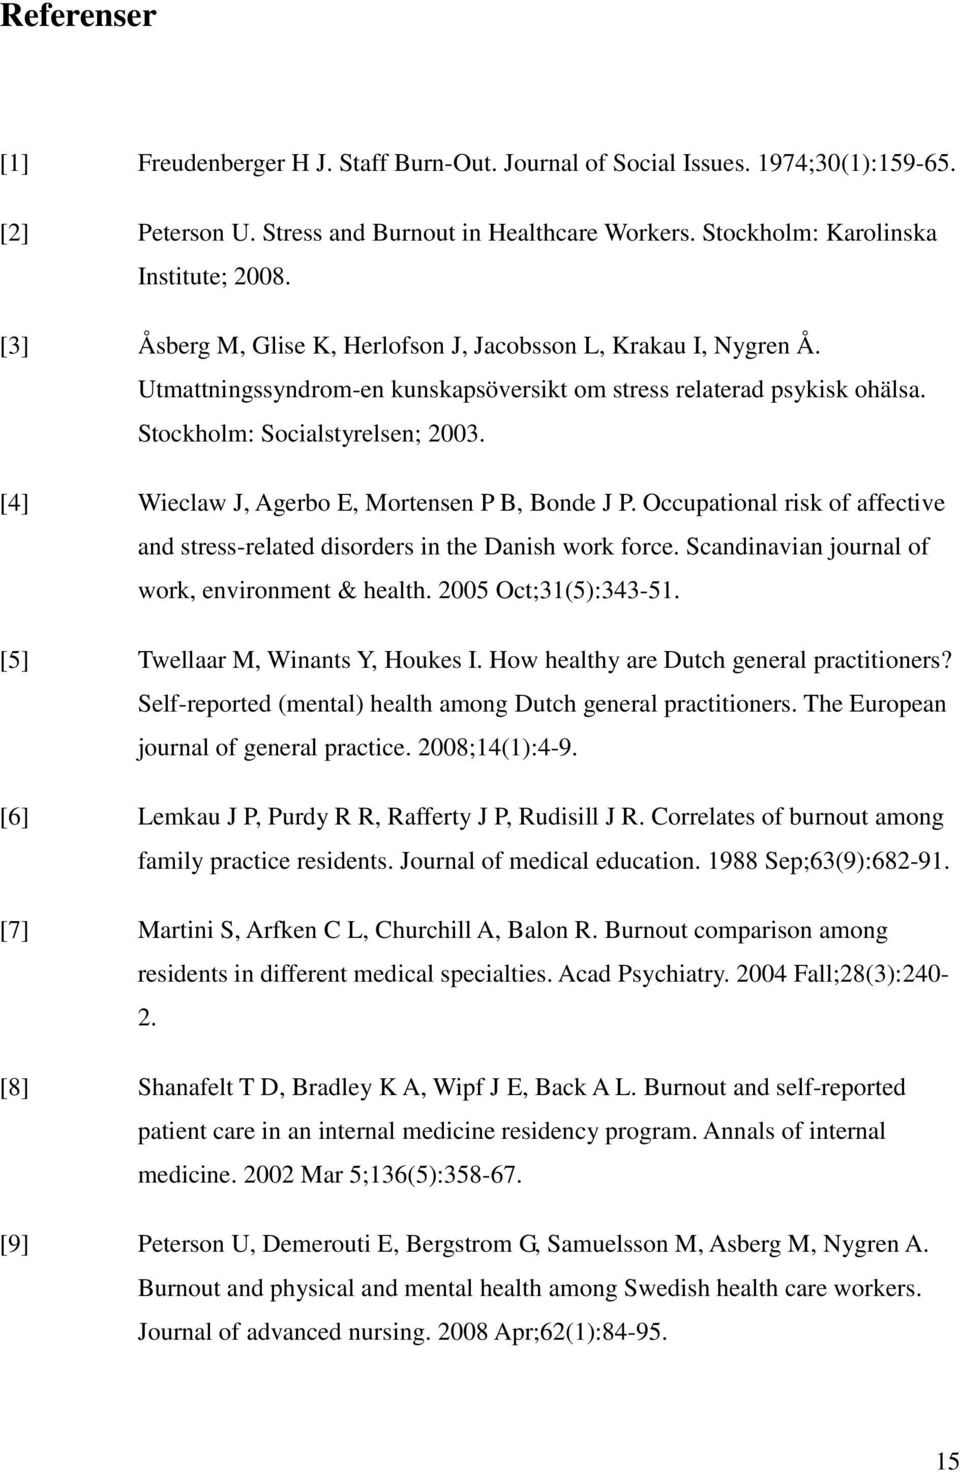 [4] Wieclaw J, Agerbo E, Mortensen P B, Bonde J P. Occupational risk of affective and stress-related disorders in the Danish work force. Scandinavian journal of work, environment & health.